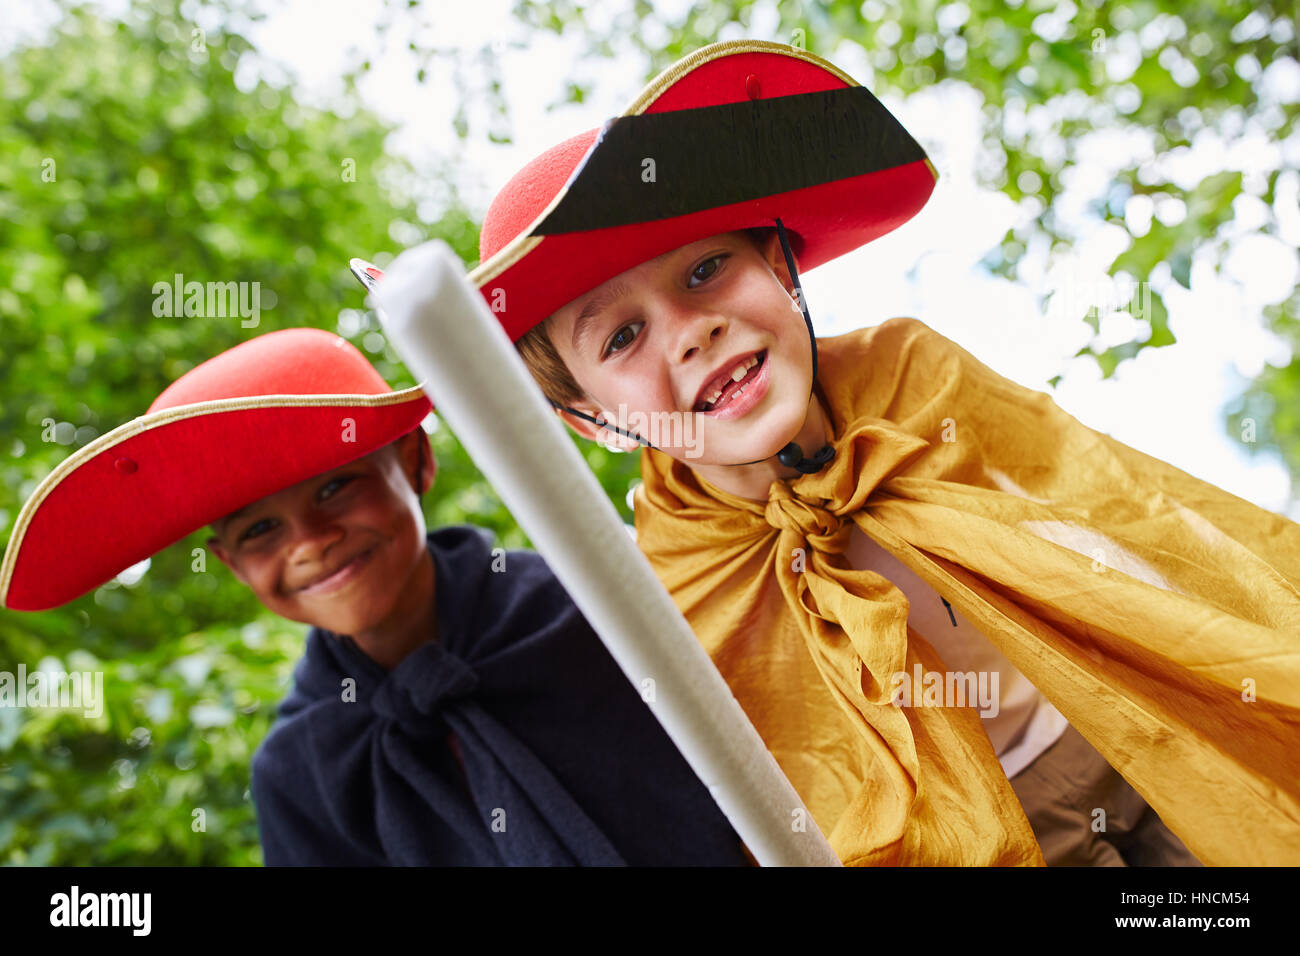 Two boys dressed up like knights playing in the park Stock Photo